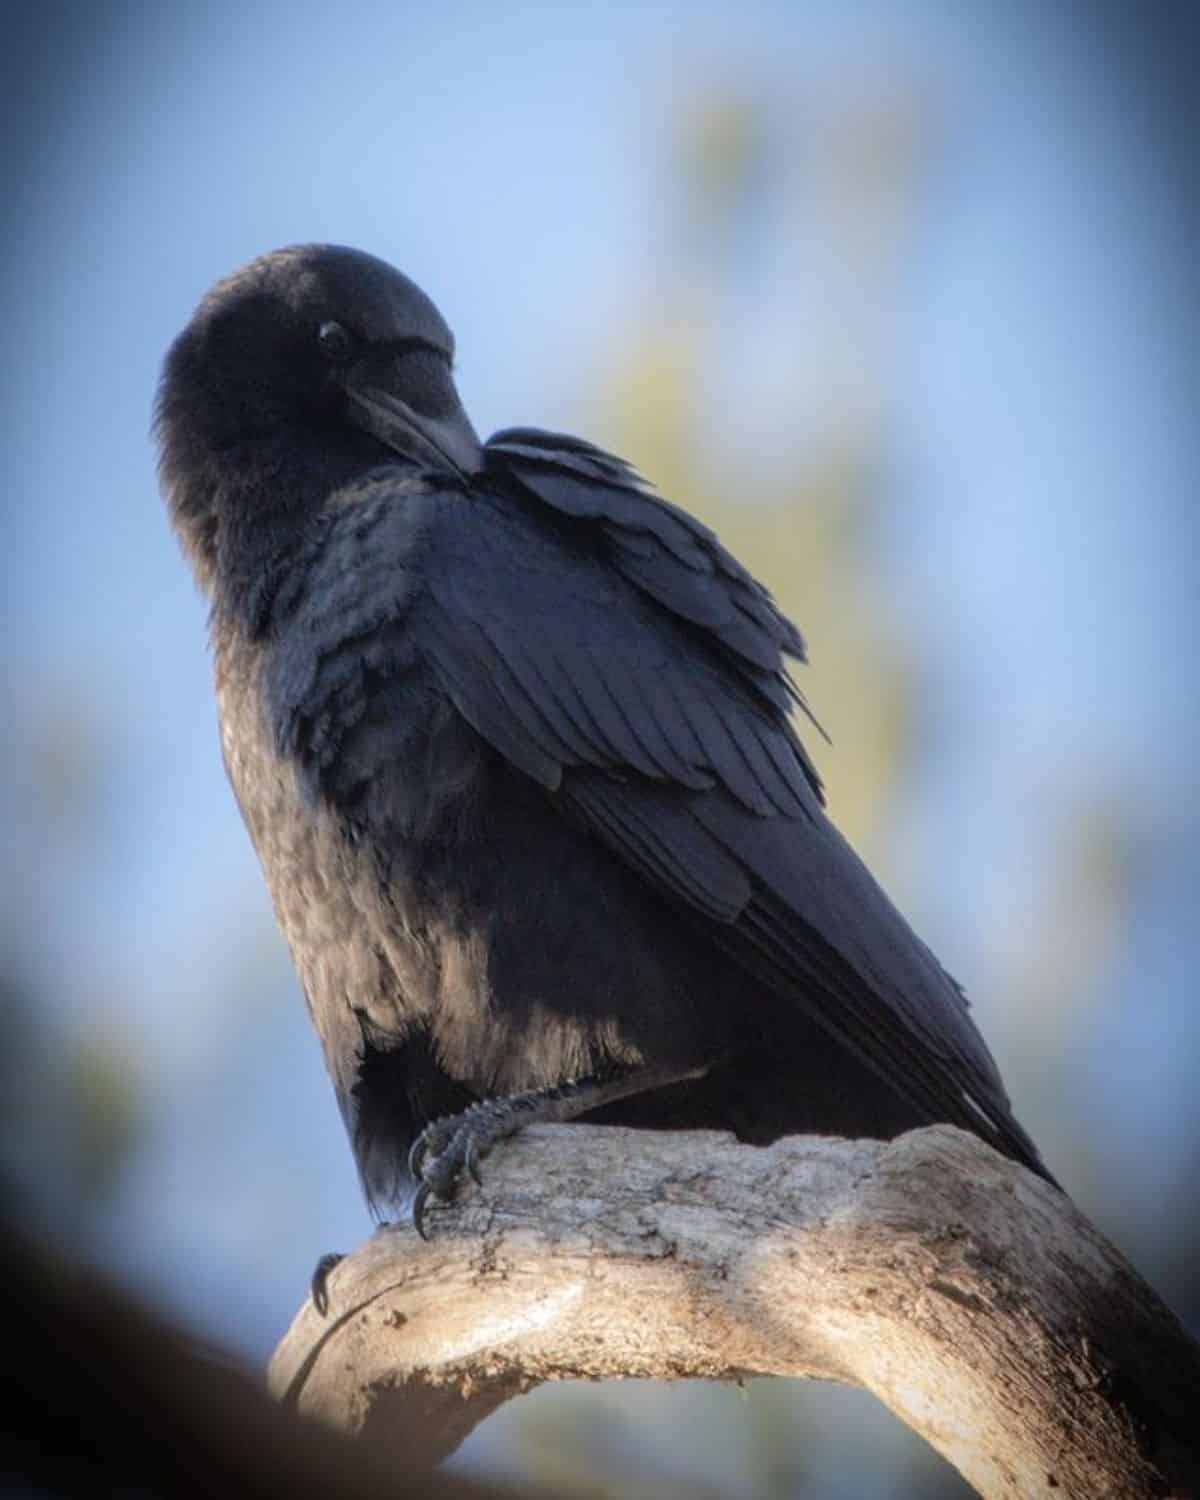 A beautiful black crow perched on a branch.